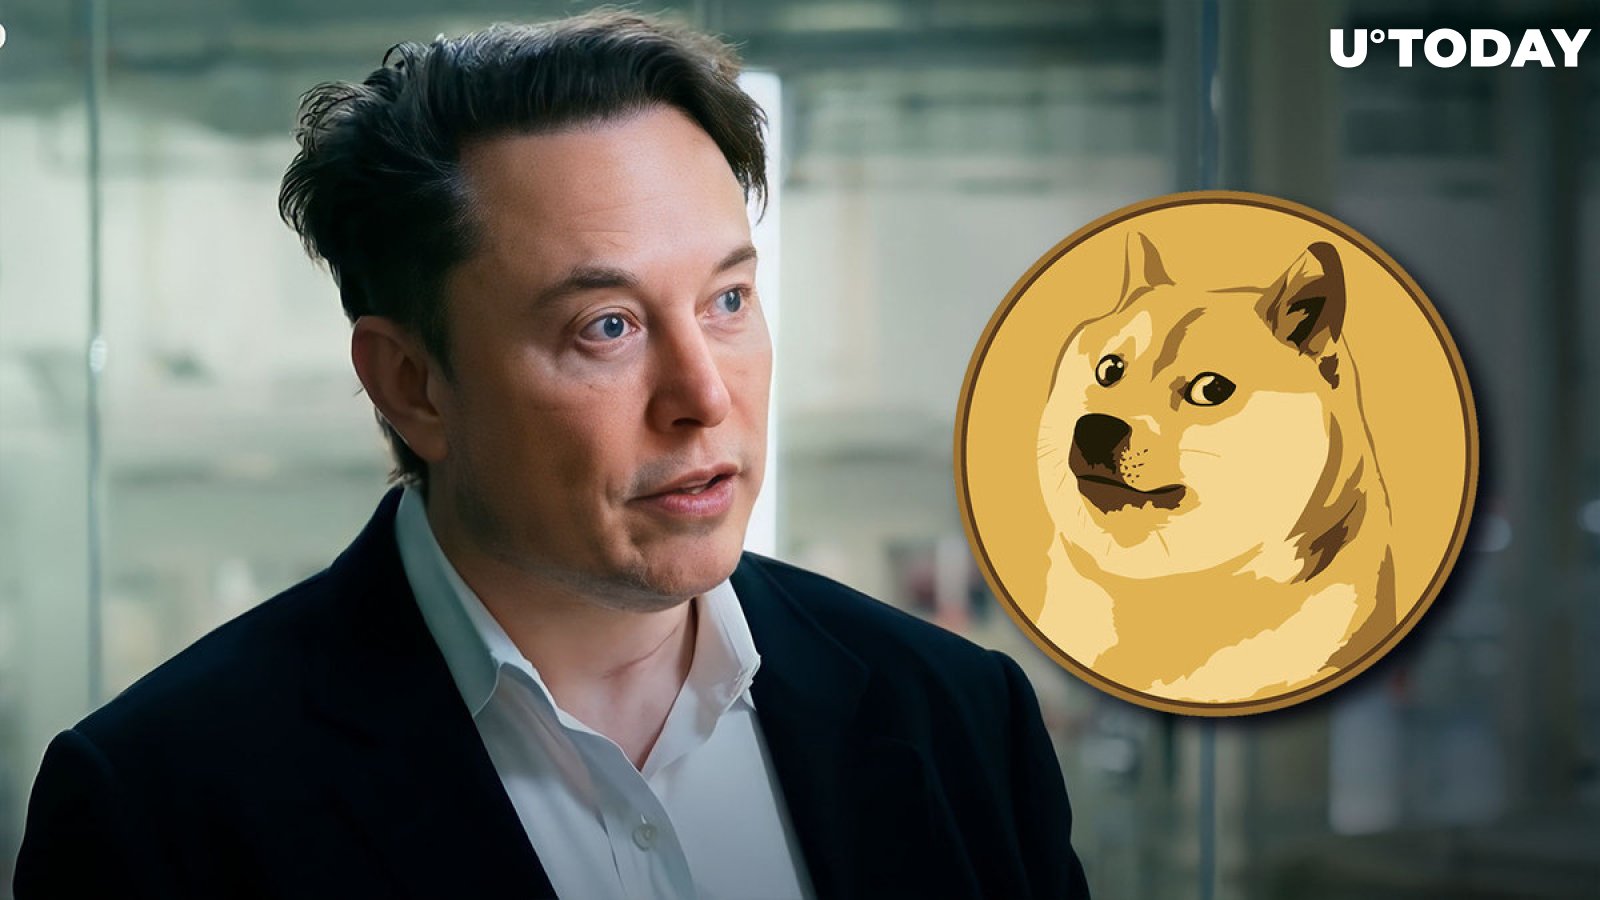 Elon Musk Might Be Hinting at Coming DOGE Integration on Twitter